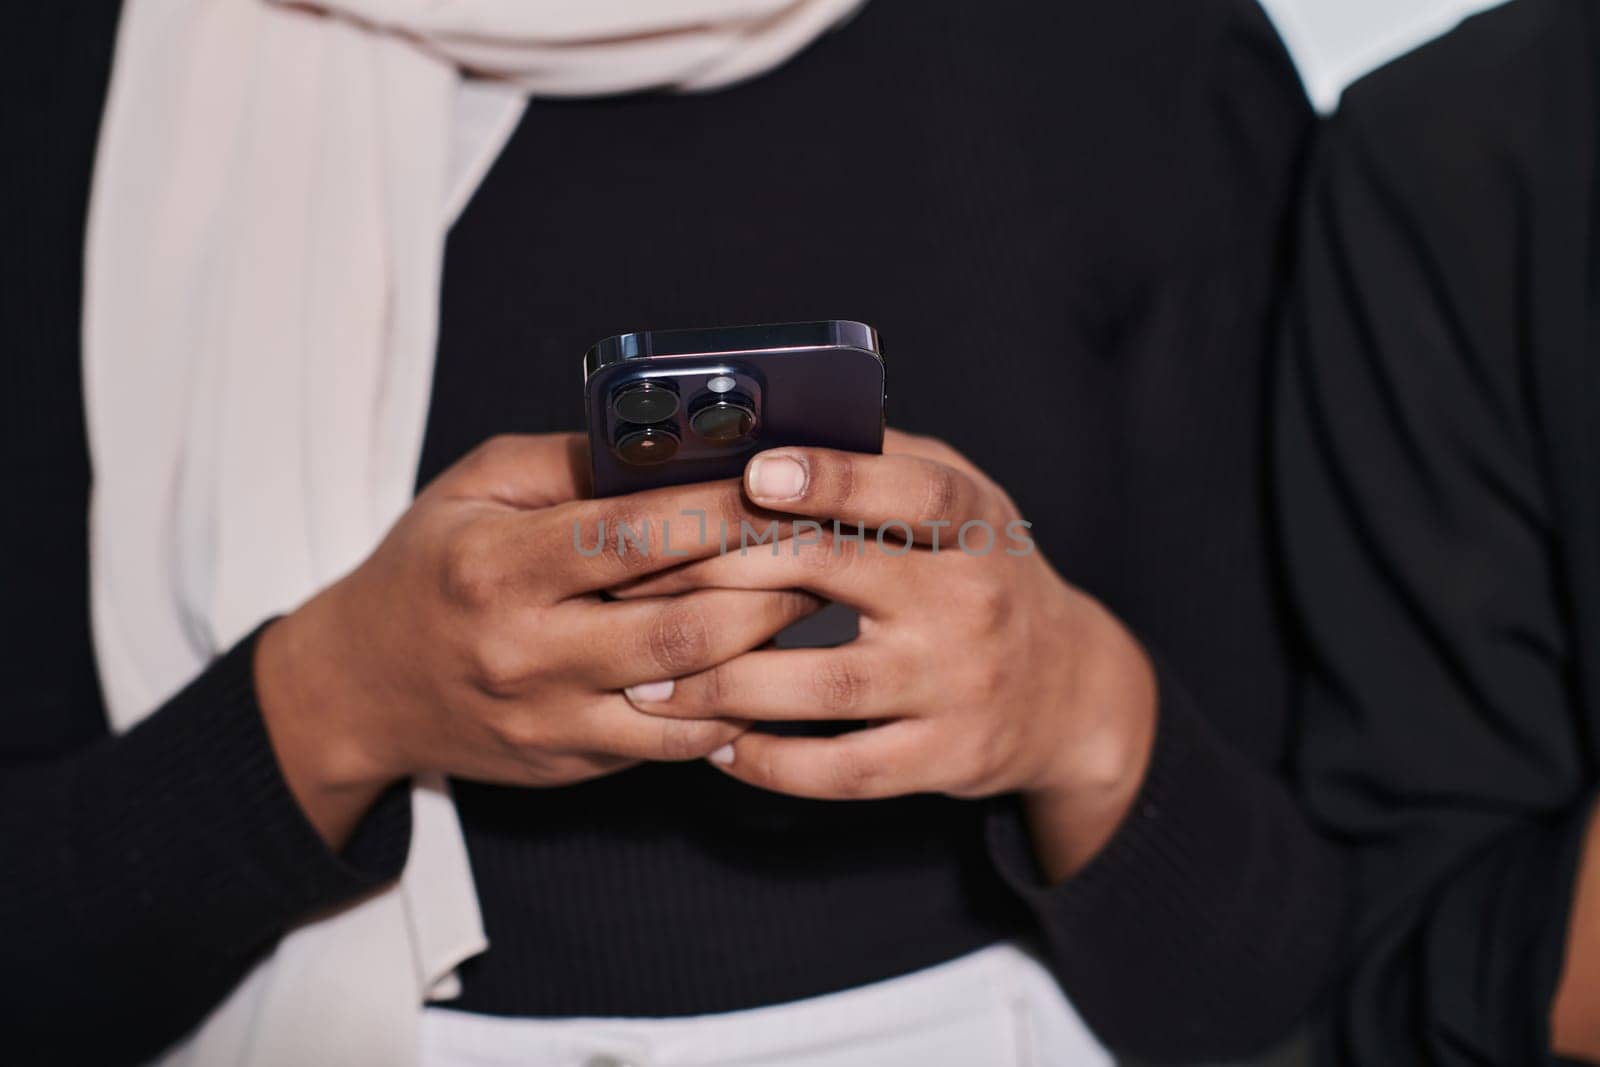 Captured in a close-up moment, a girl in hijab skillfully engages with her smartphone, reflecting a contemporary lifestyle where digital connectivity seamlessly intertwines with cultural expression, showcasing the empowerment and diversity embodied in modern technology usage.